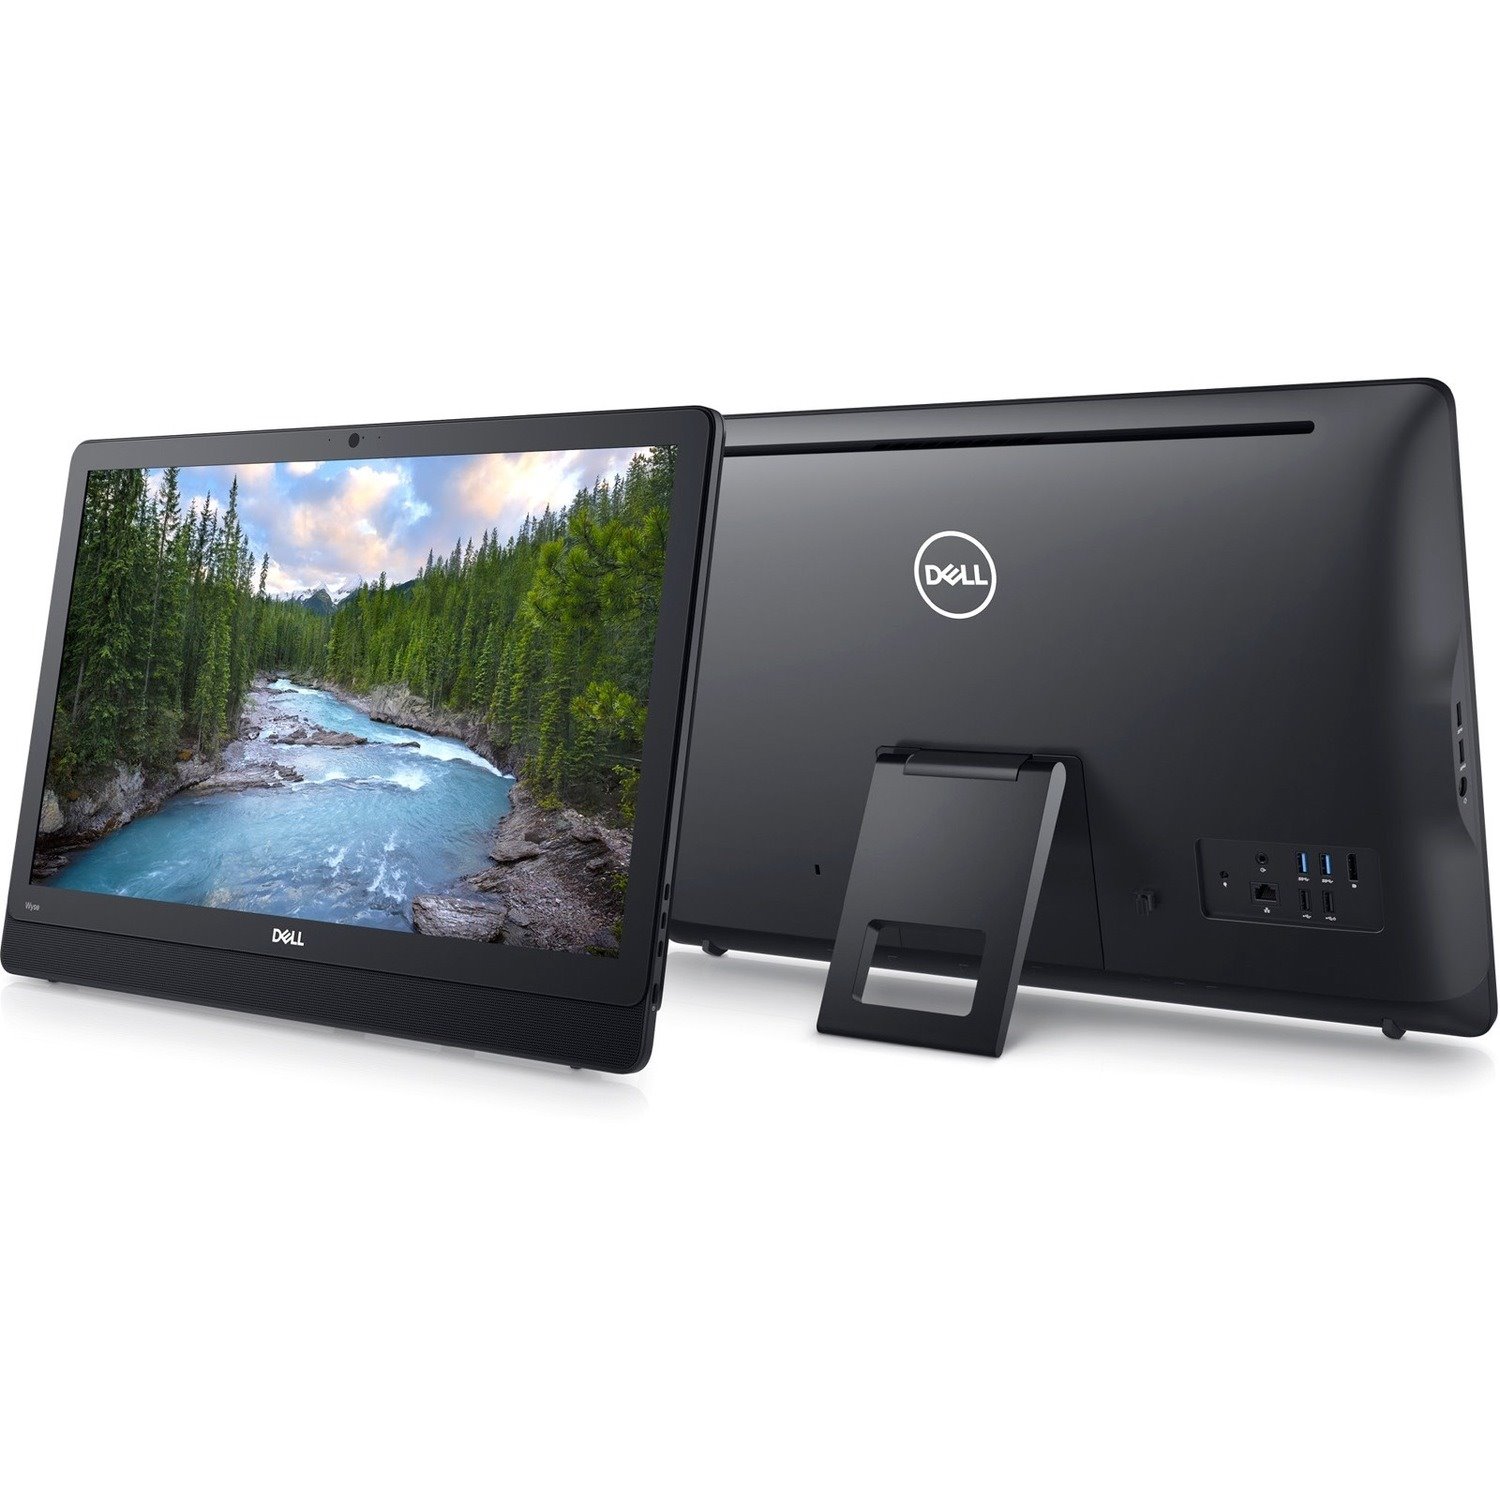 Dell-IMSourcing 5000 5470 All-in-One Thin Client - Intel Celeron J4105 Quad-core (4 Core) 1.50 GHz